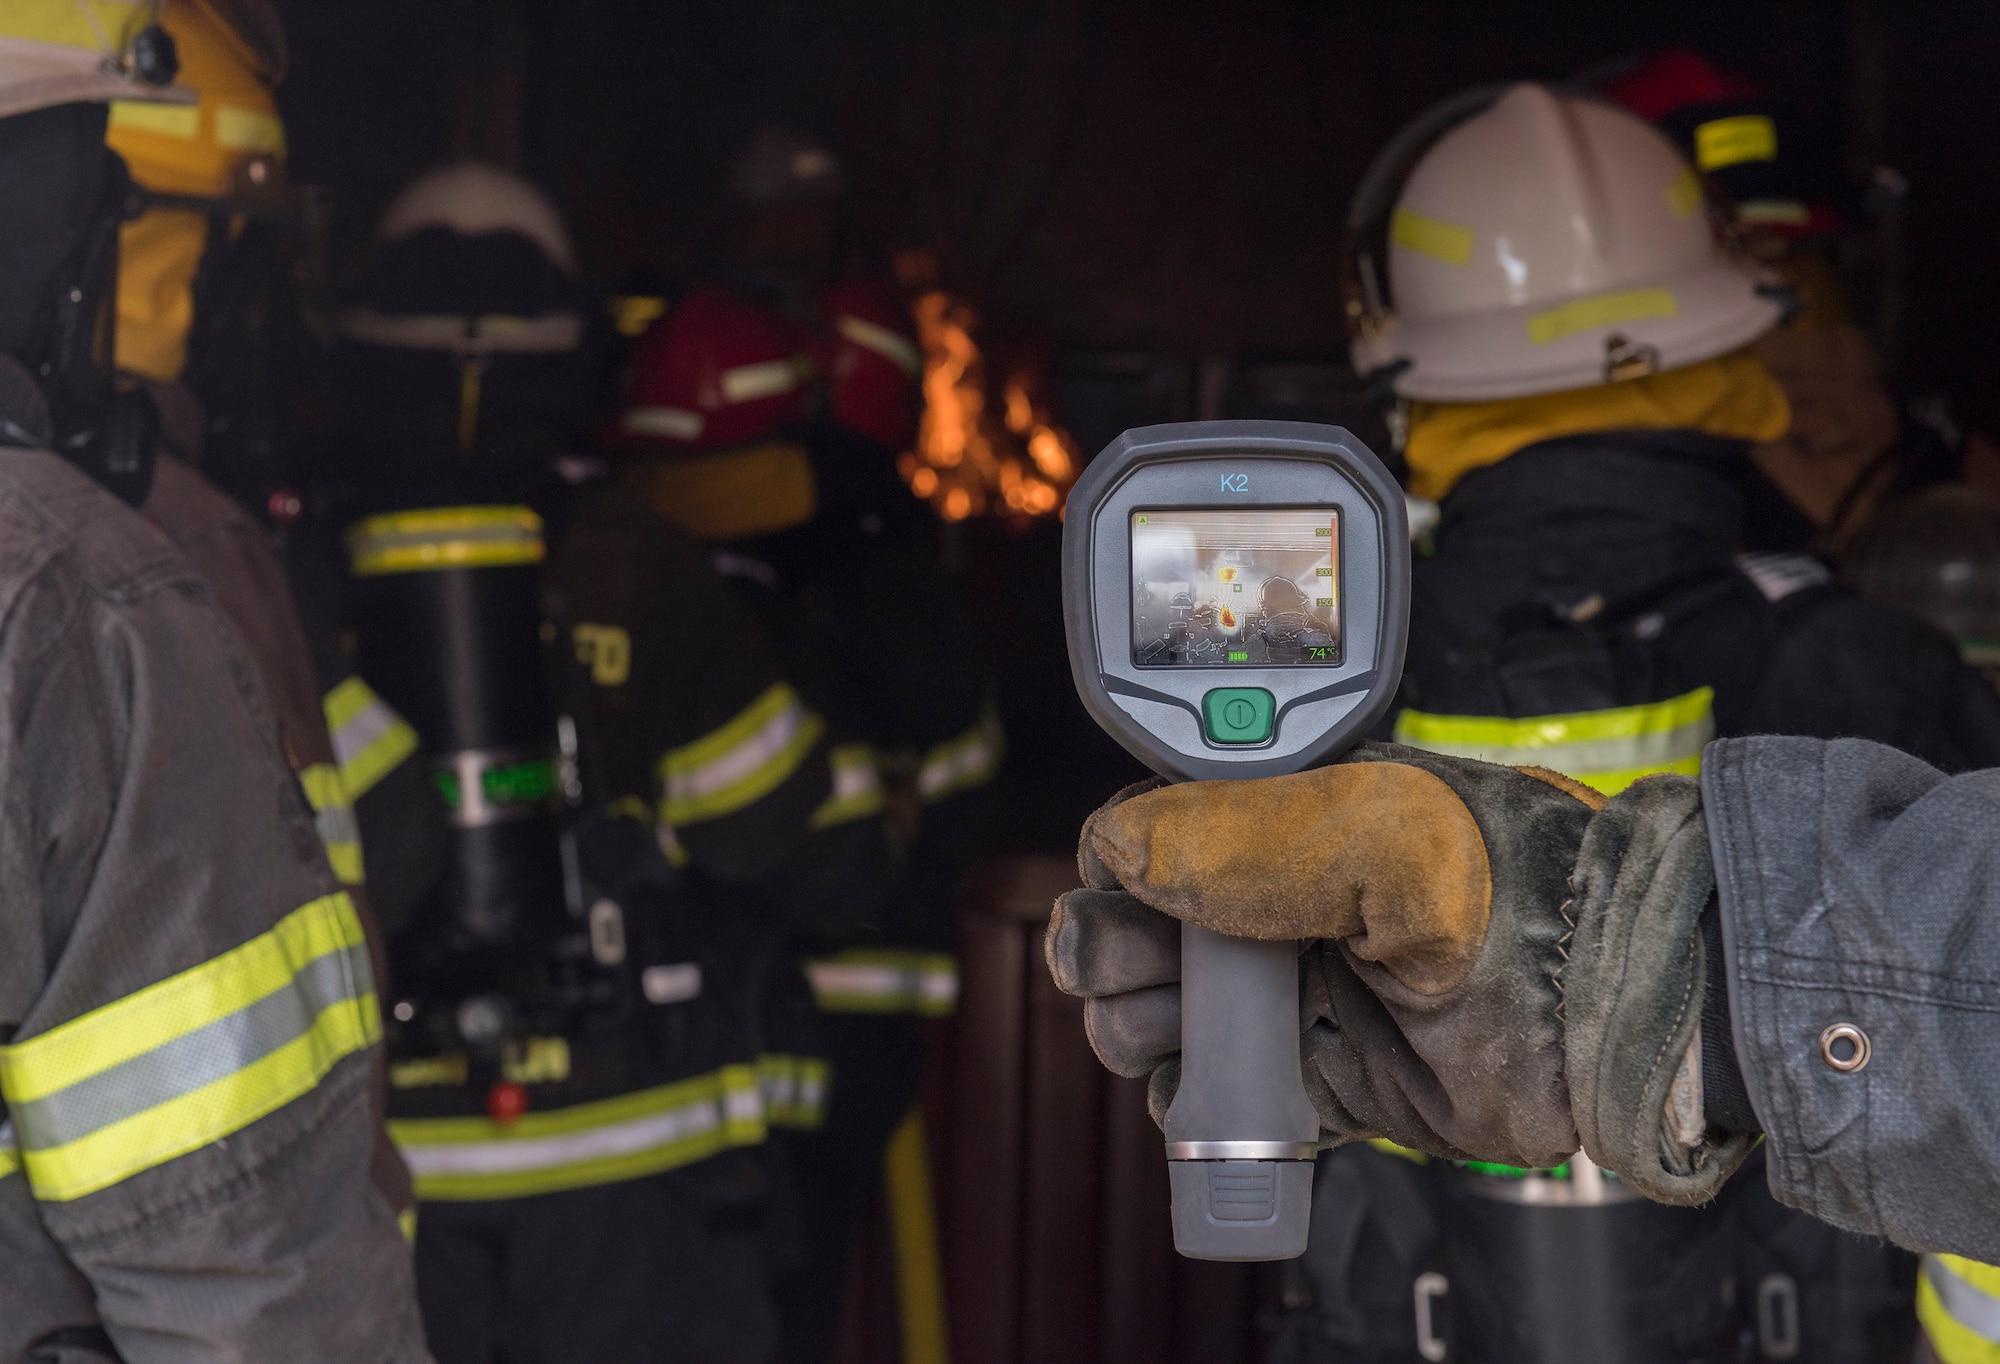 RAF Alconbury firefighters use new fire behavior trainer to practice techniques for safely fighting fires at RAF Alconbury, England, July 17, 2019. (U.S. Air Force photo by Airman 1st Class Jennifer Zima)